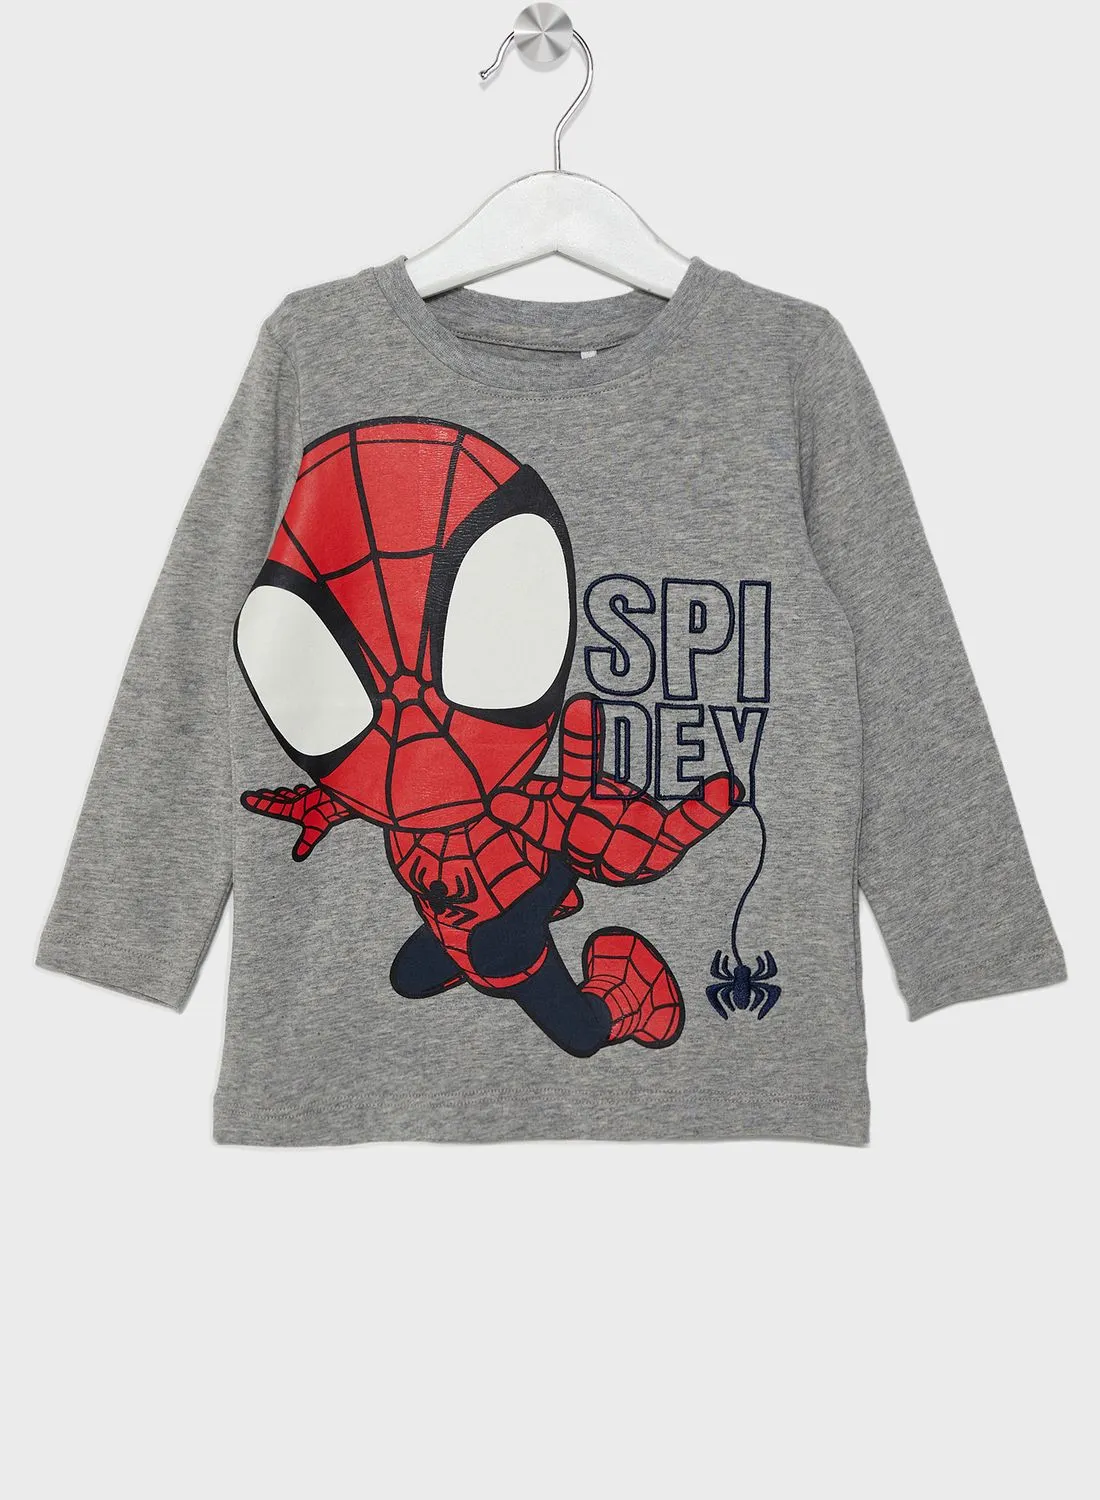 NAME IT Kids Spidey Graphic Top